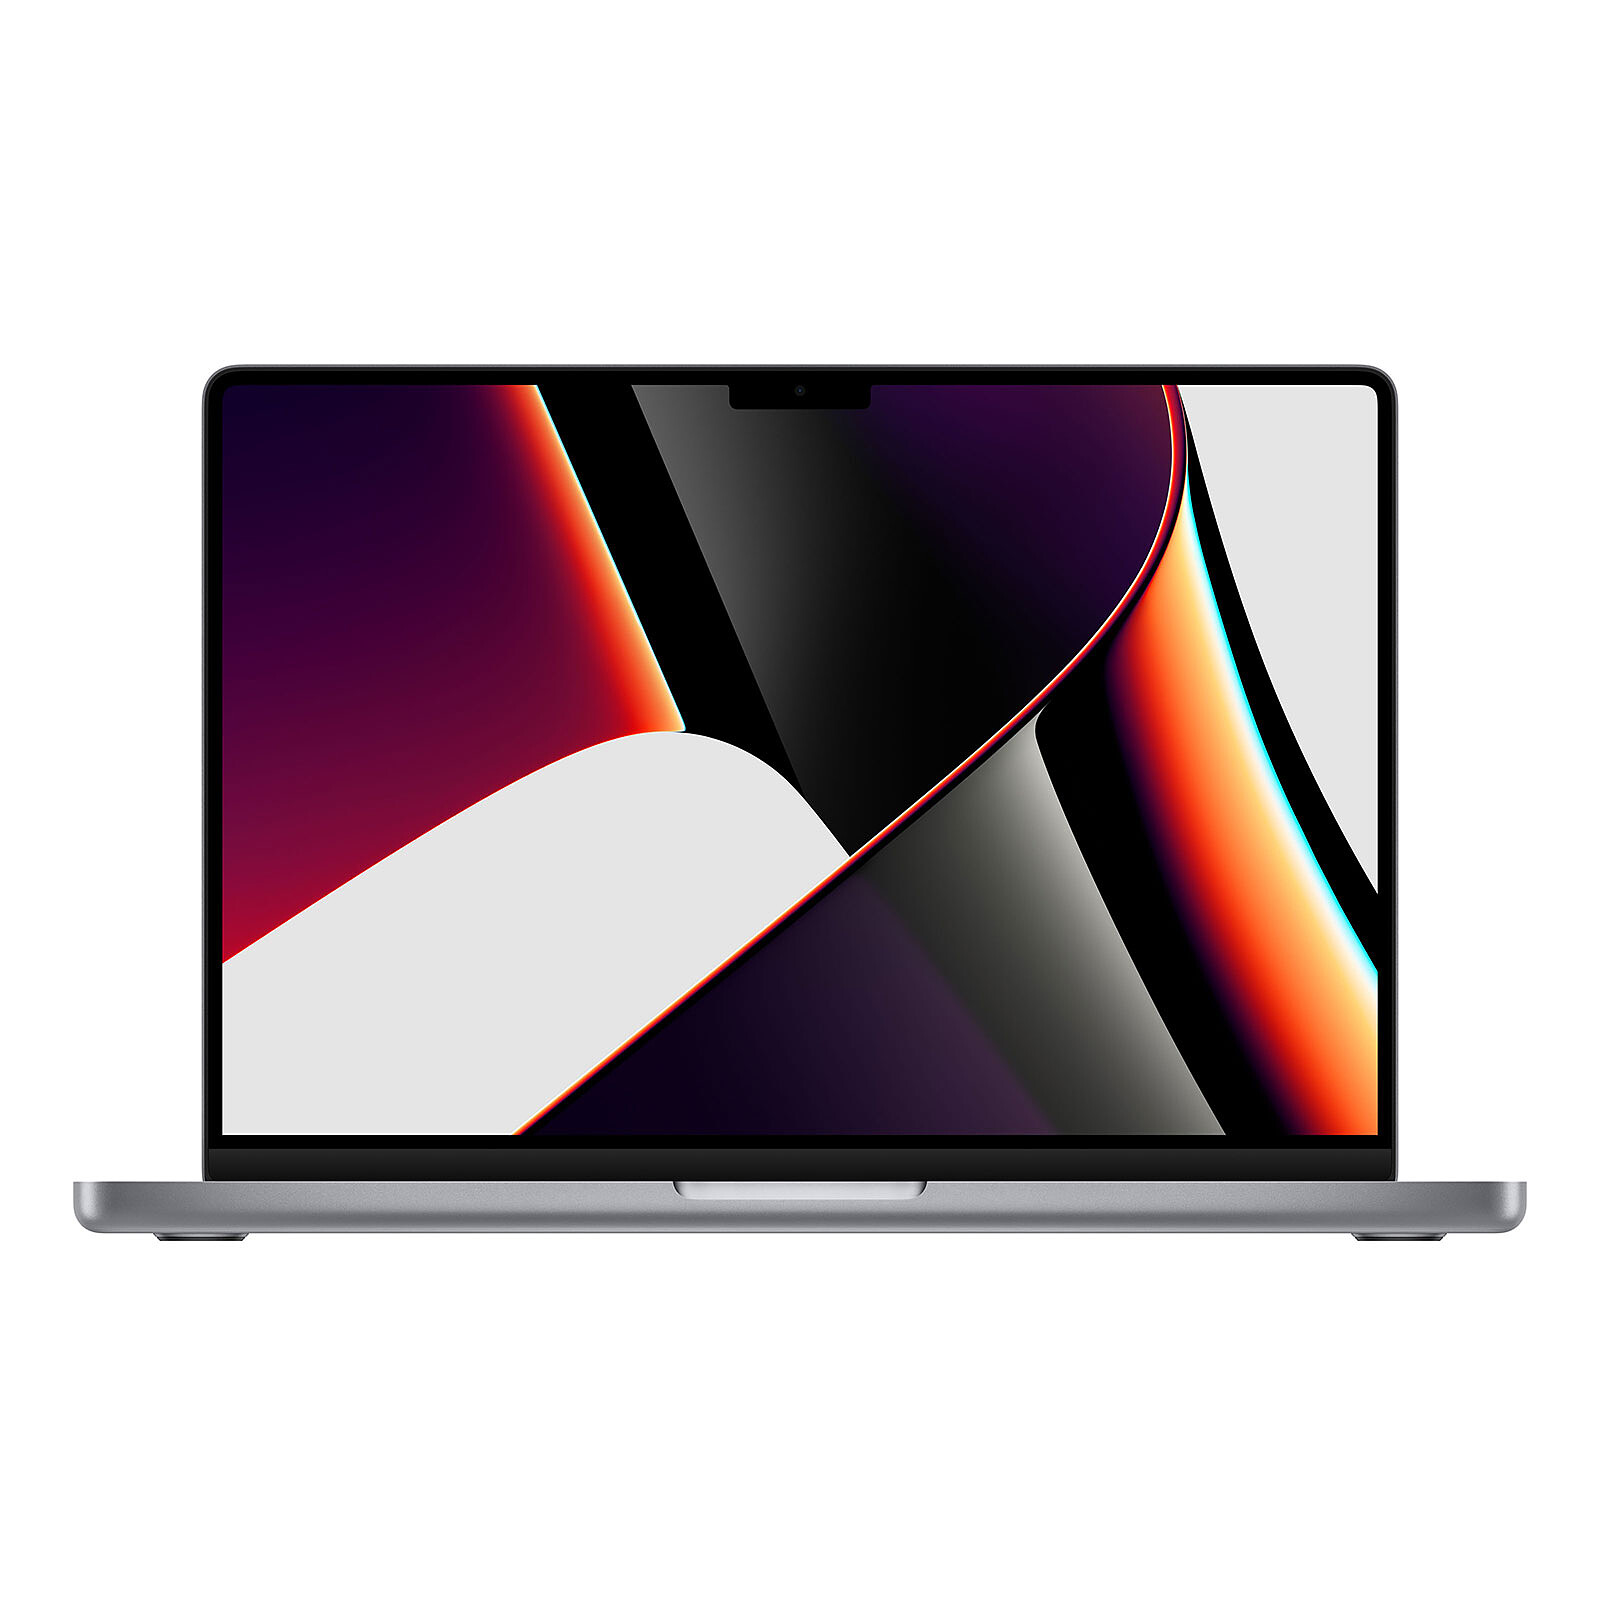 Rational her Previous Apple MacBook Pro M1 Pro (2021) 14" Space Grey 32GB/1TB (MKGQ3FN/A-32GB) -  MacBook Apple on LDLC